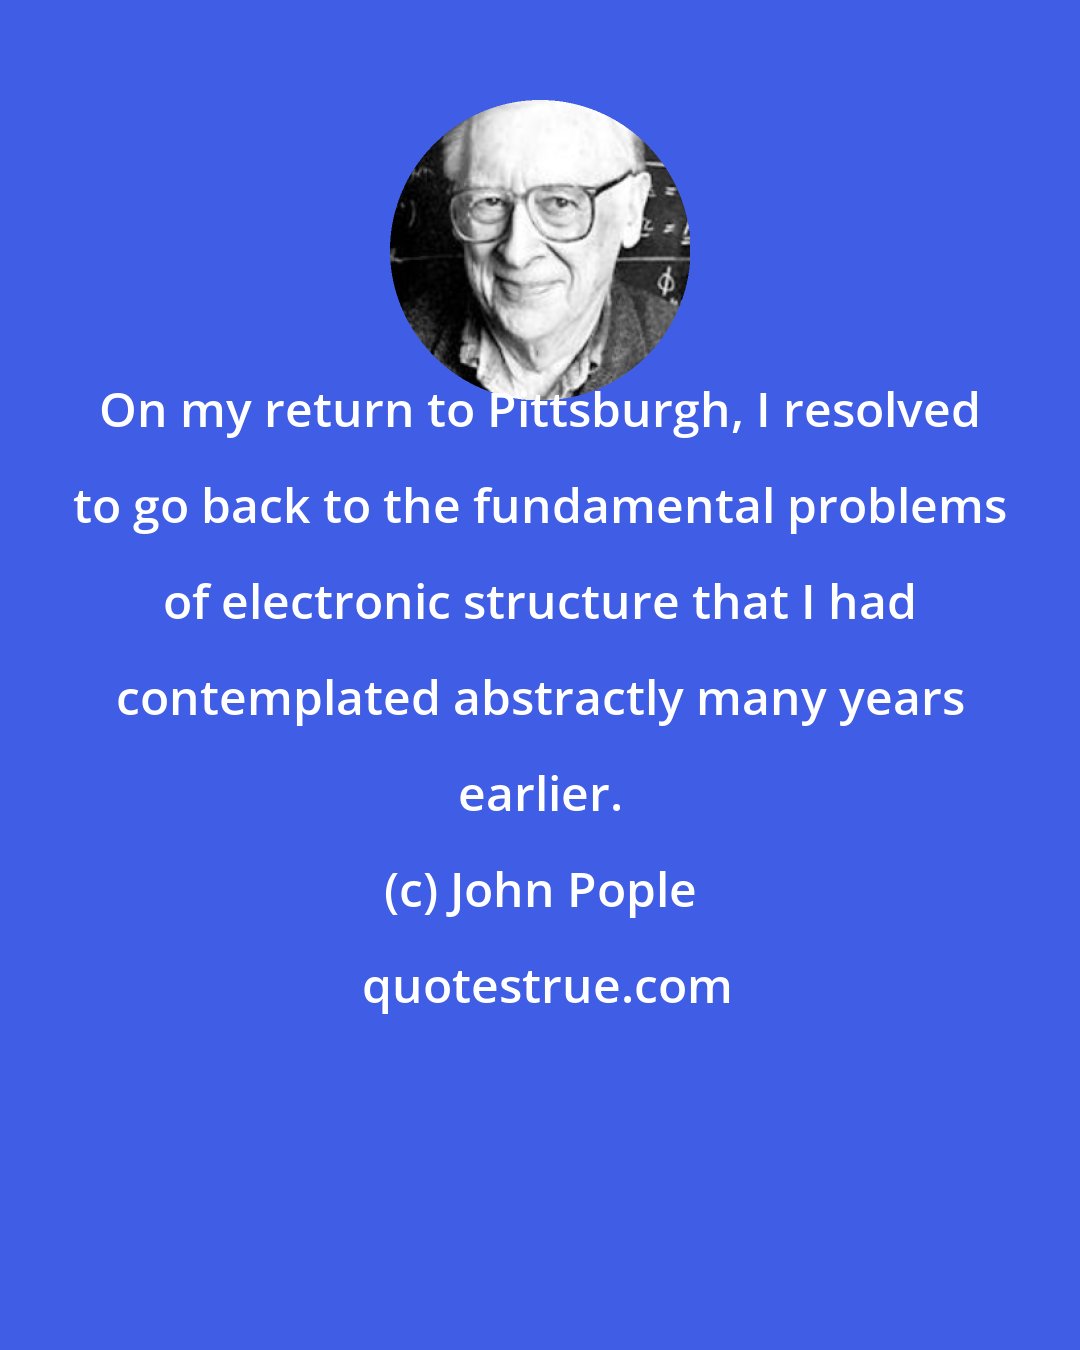 John Pople: On my return to Pittsburgh, I resolved to go back to the fundamental problems of electronic structure that I had contemplated abstractly many years earlier.